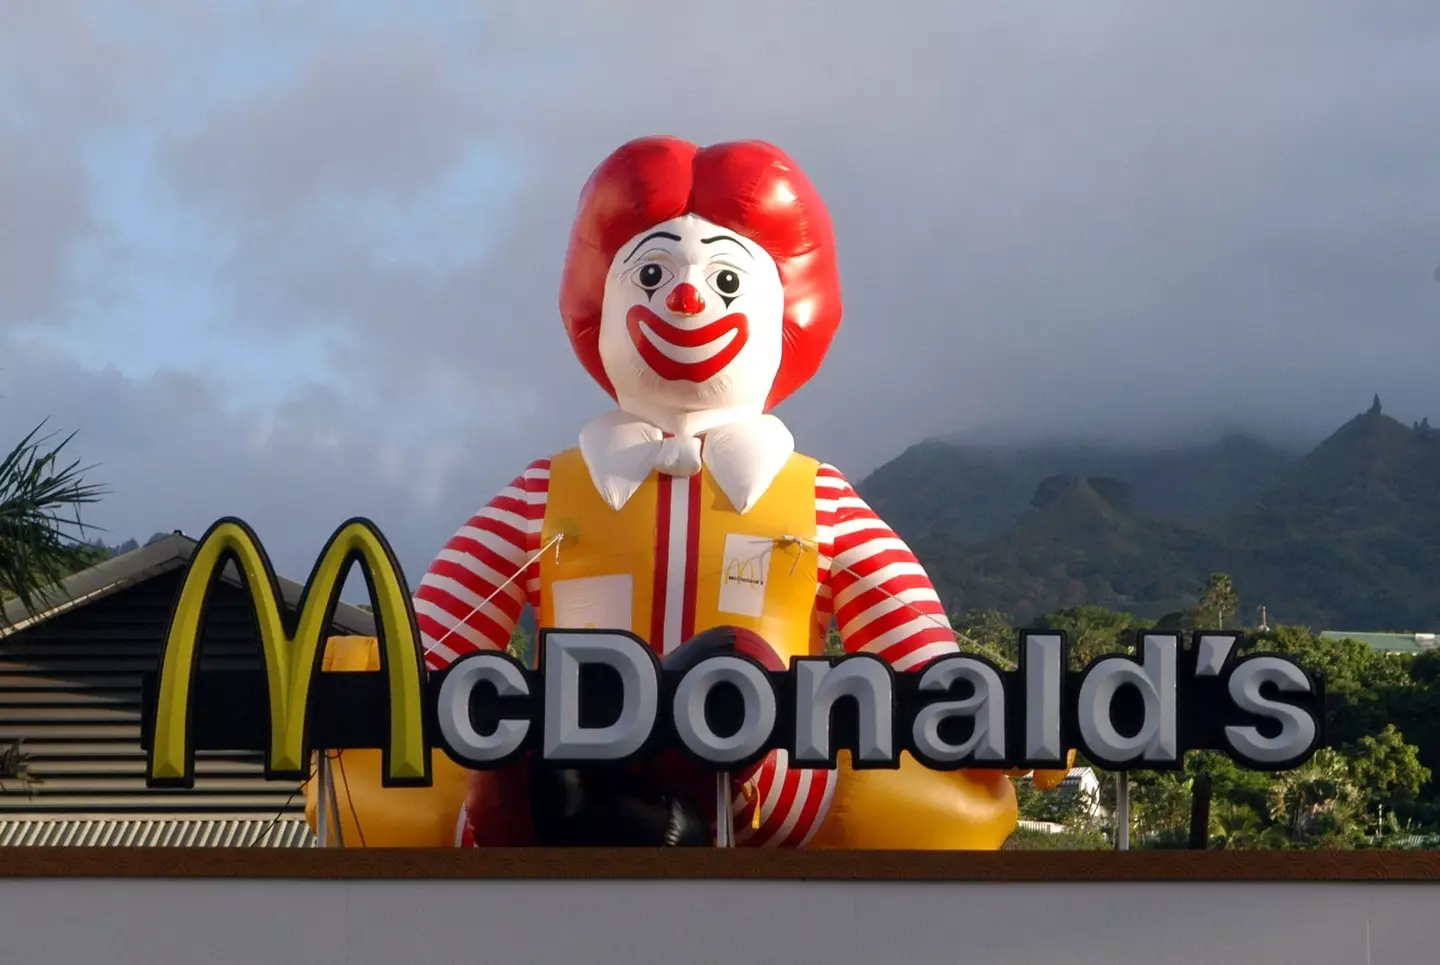 The infamous McDonald's mascot had to take a step back due to the killer clown craze.